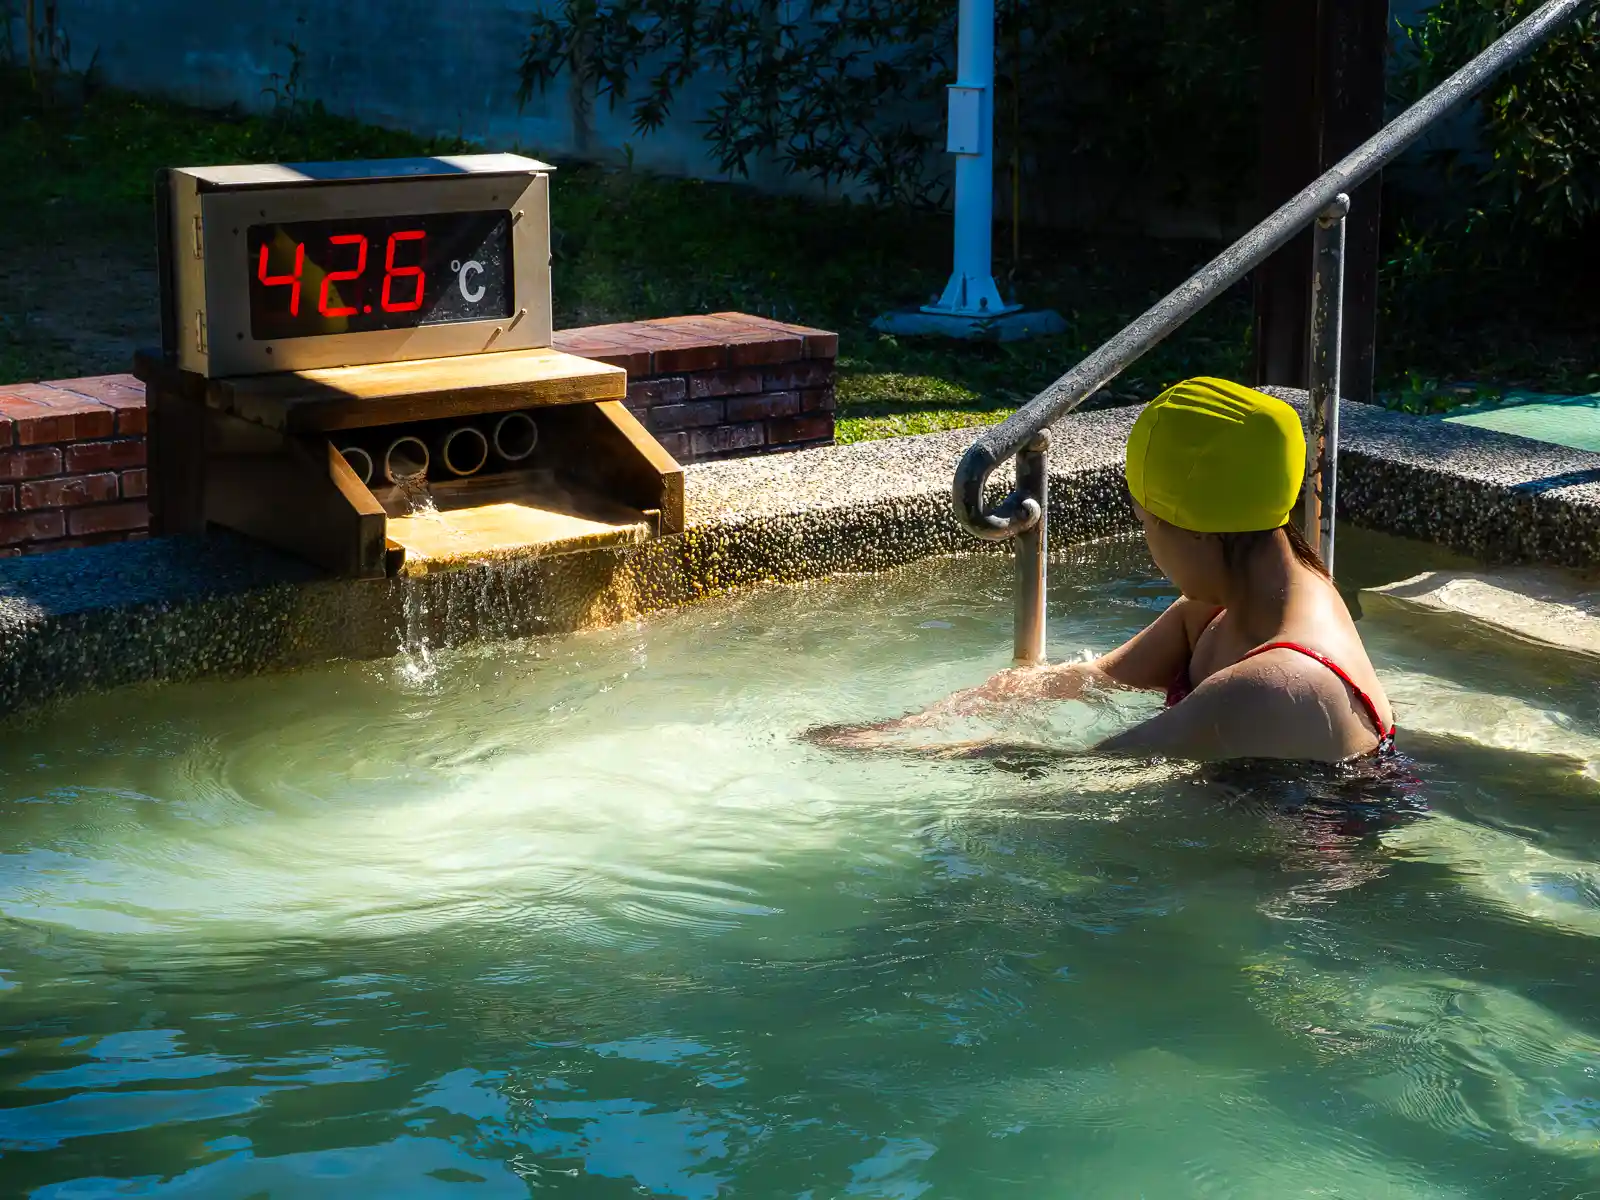 A tourist bathes in an outdoor hot spring pool which is measured to be 42.6 degrees Celsius.